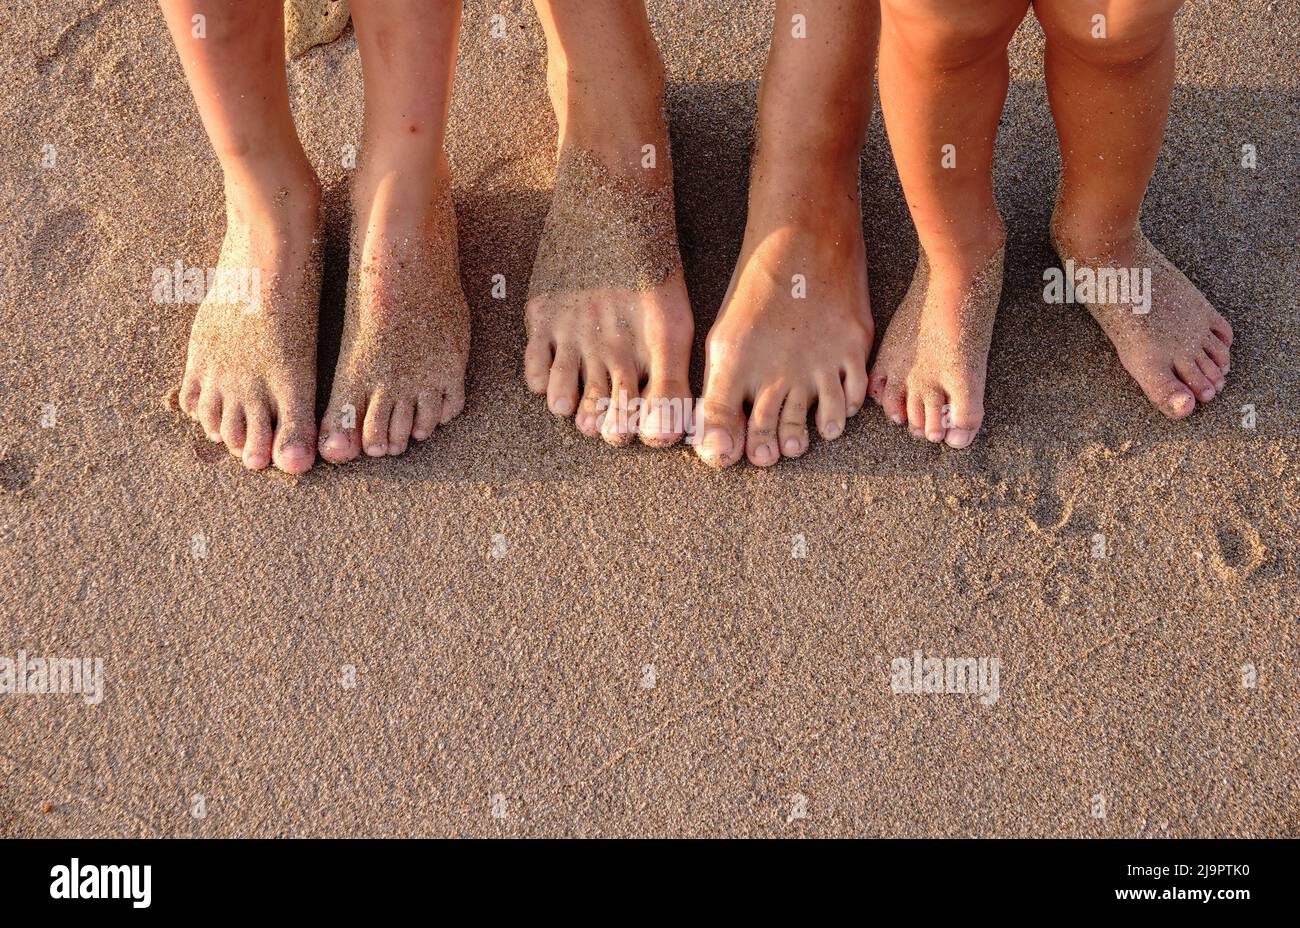 500+ Bare Feet Pictures [hd]